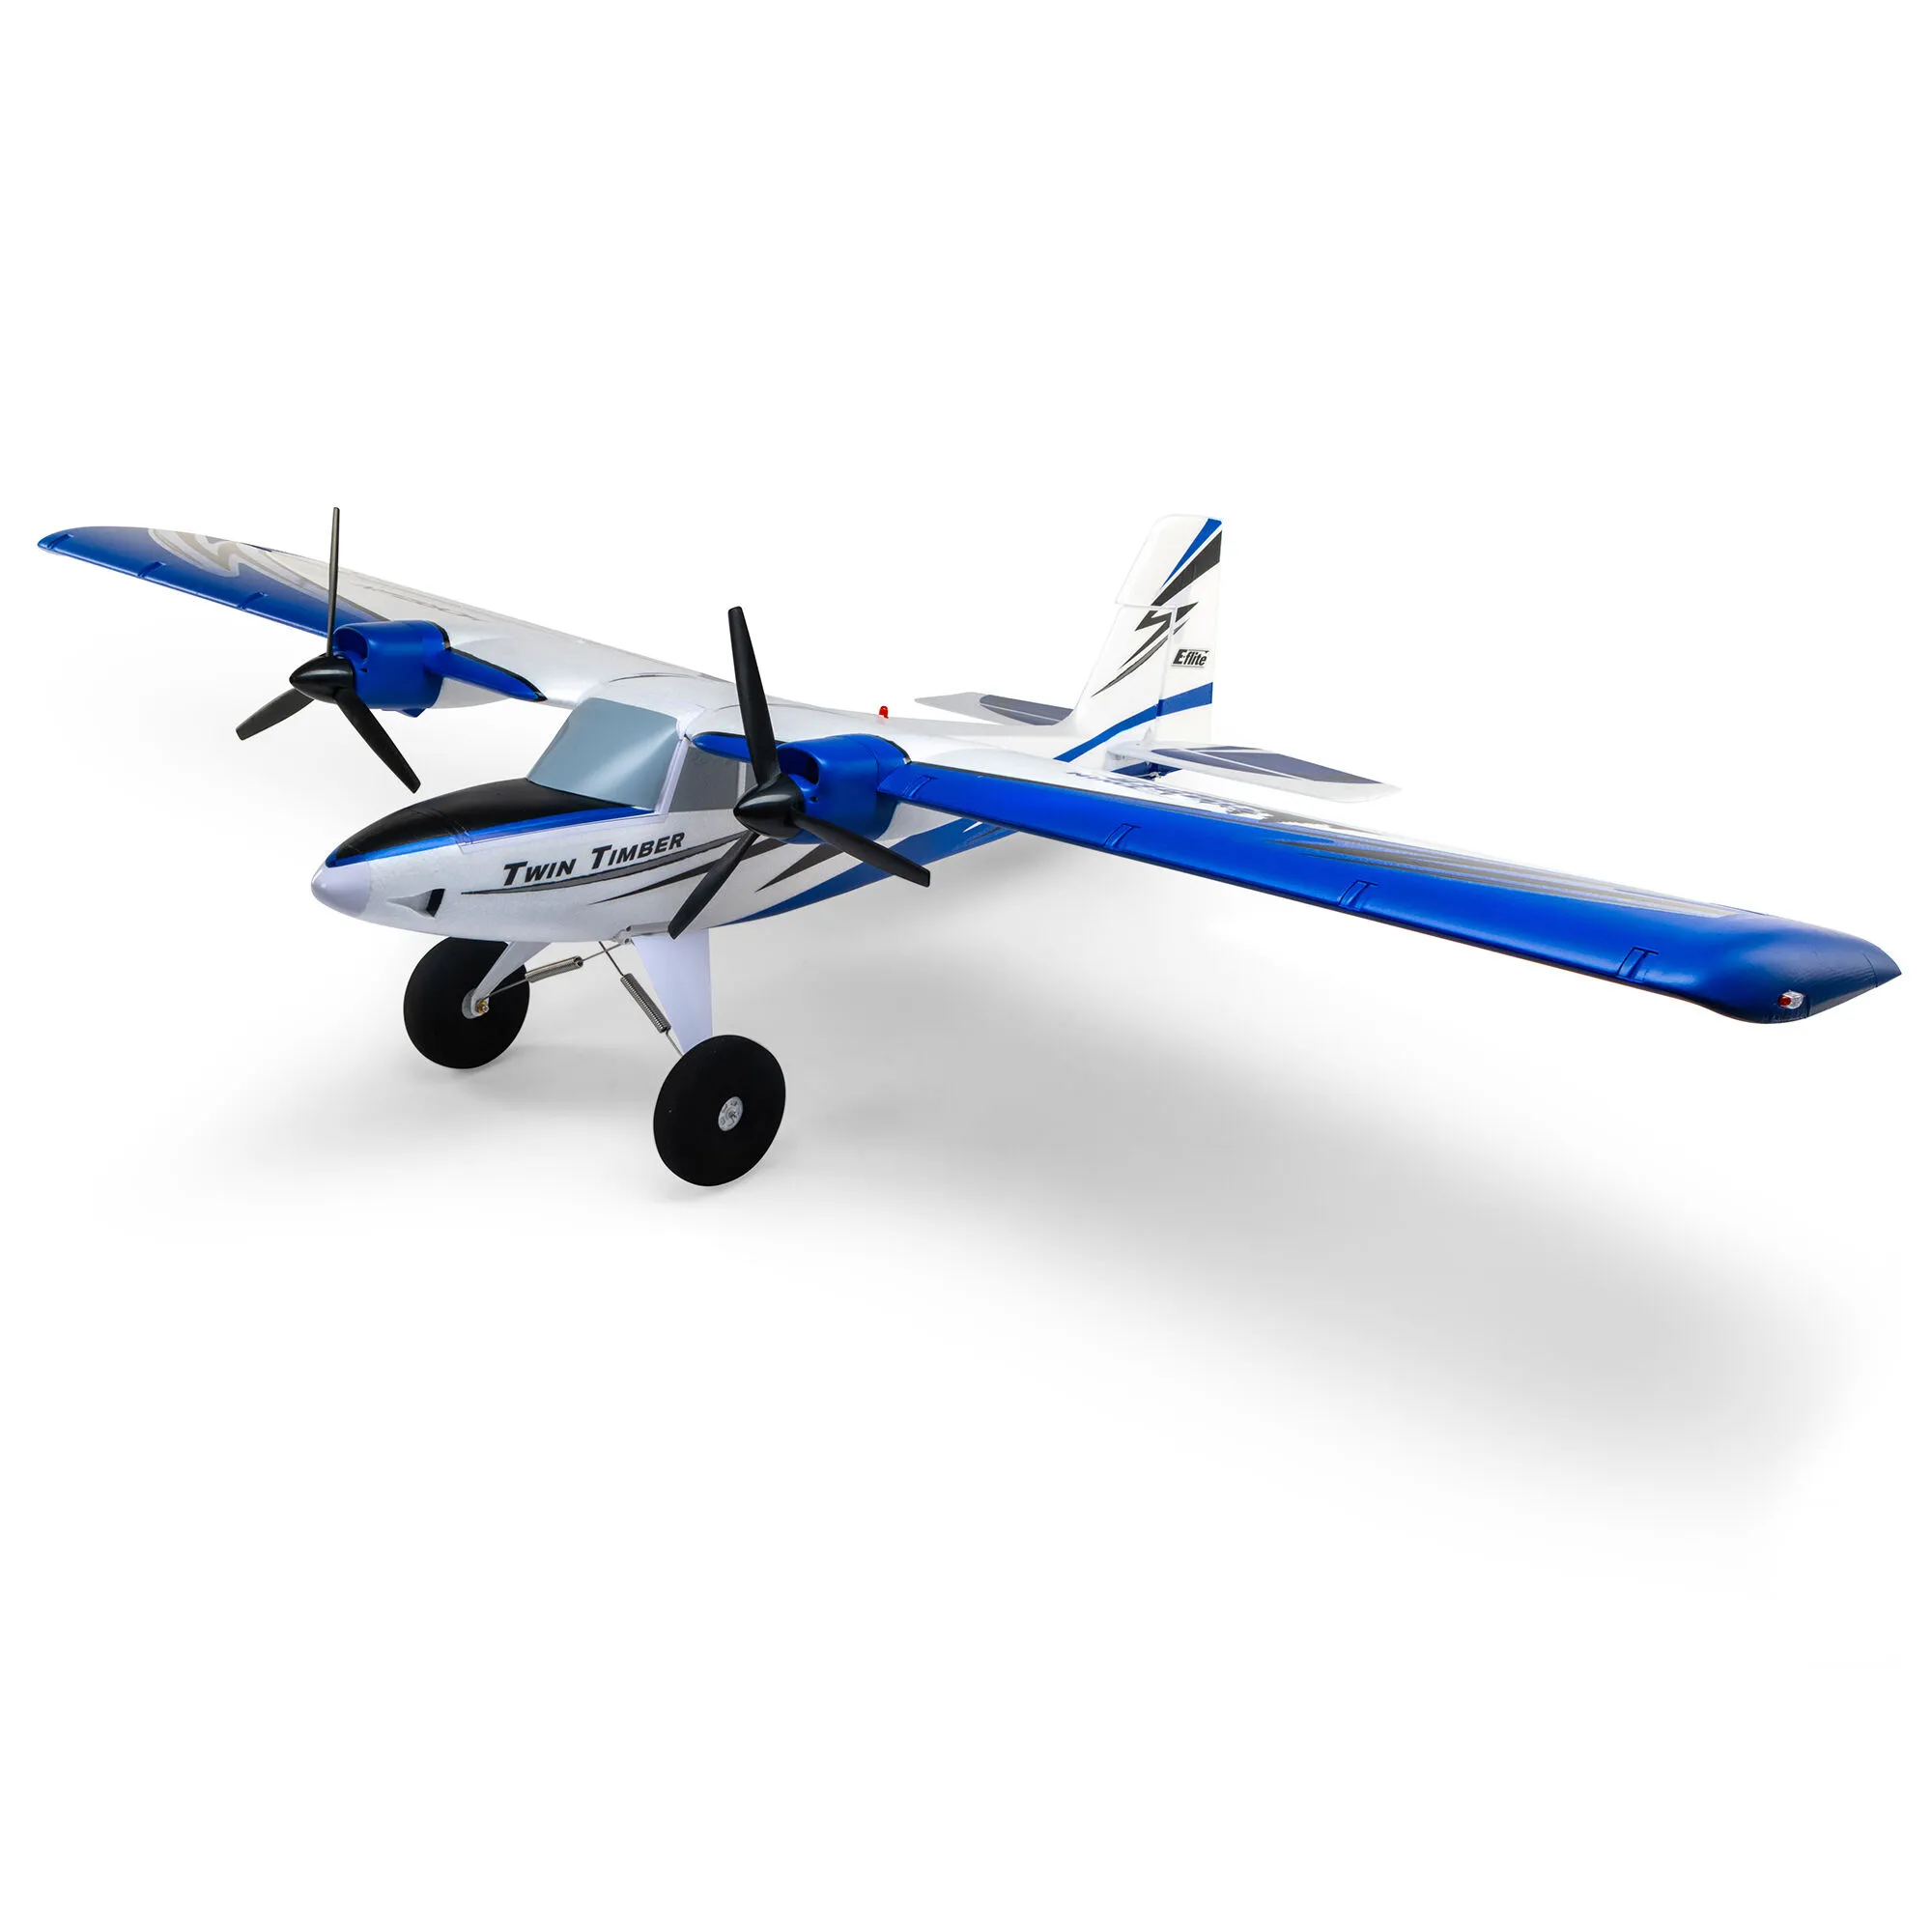 E-Flite Twin Timber 1.6m STOL RC Plane, BNF Basic